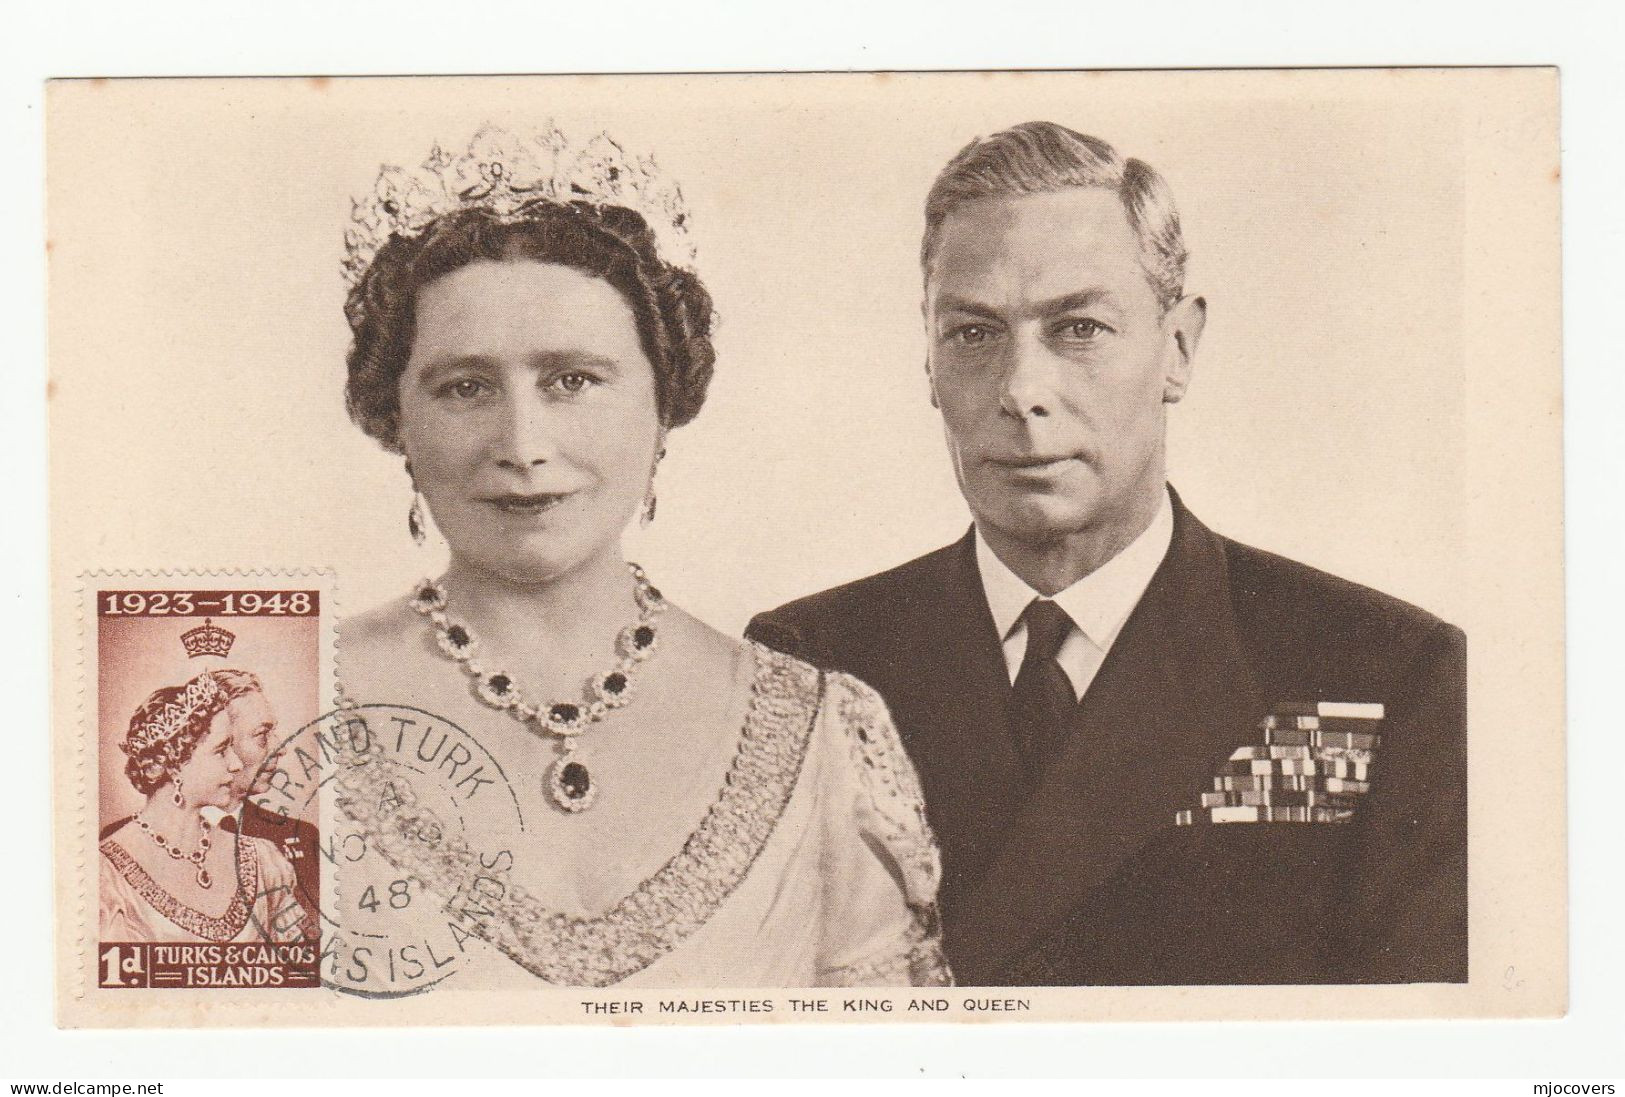 1948 TURKS & CAICOS Royal Silver Wedding Postcard Franked 1d Royal Wedding Stamp On Front Of Card  To GB Cover Royalty - Royalties, Royals